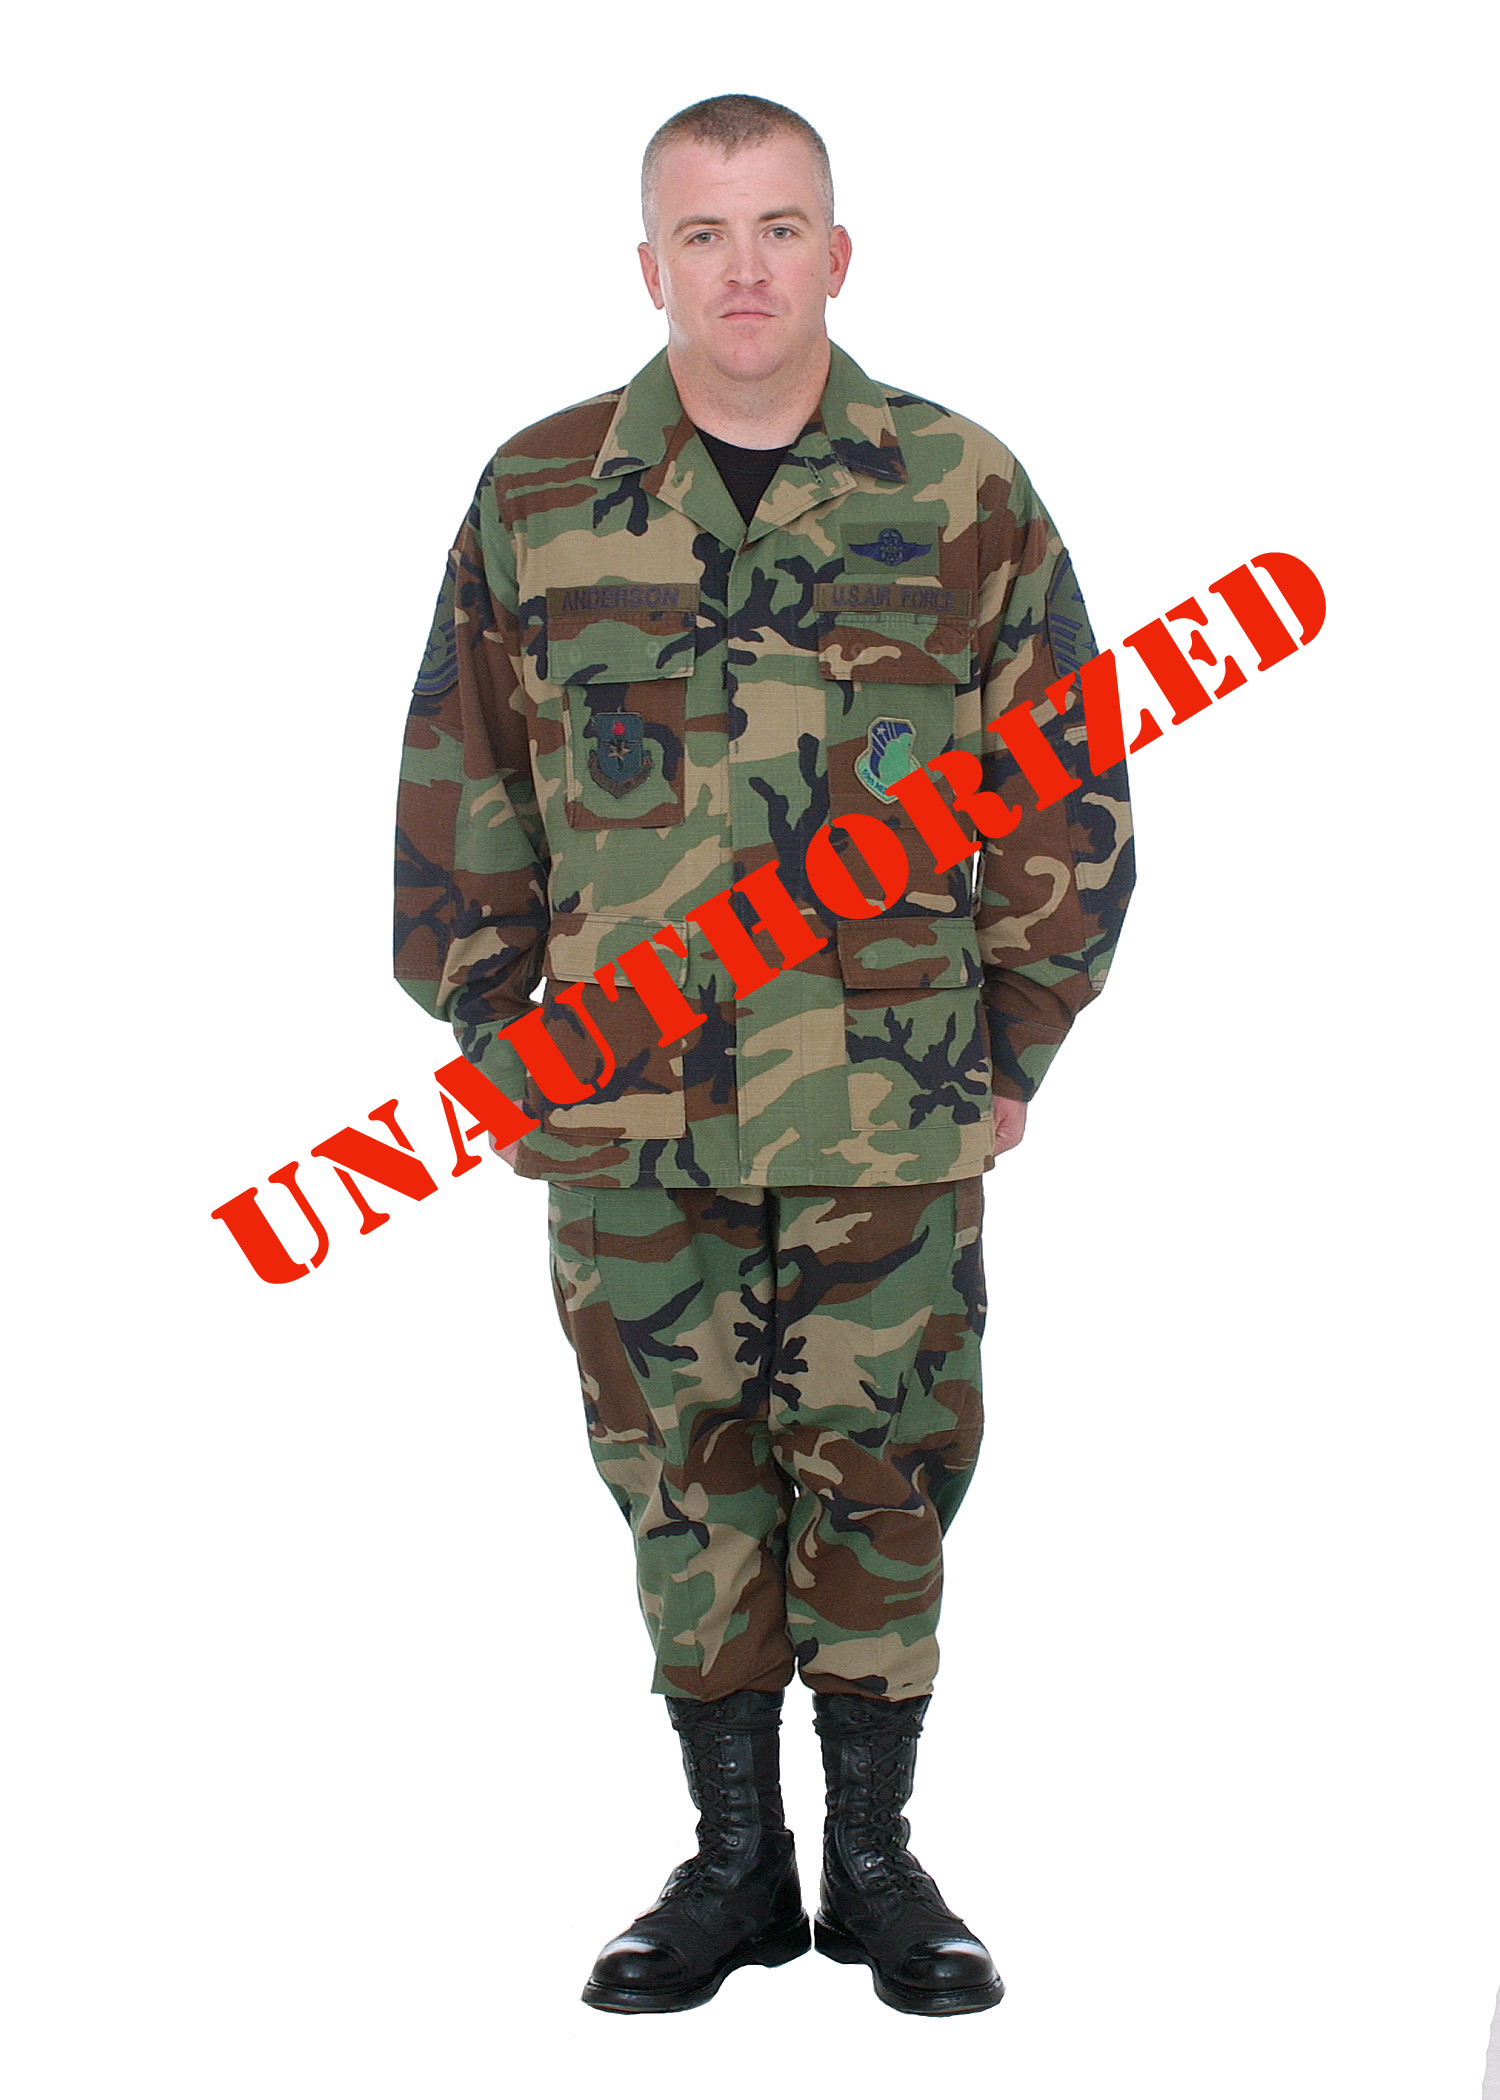 Military Dress Code Military Uniforms By Branch Empire, 51% OFF